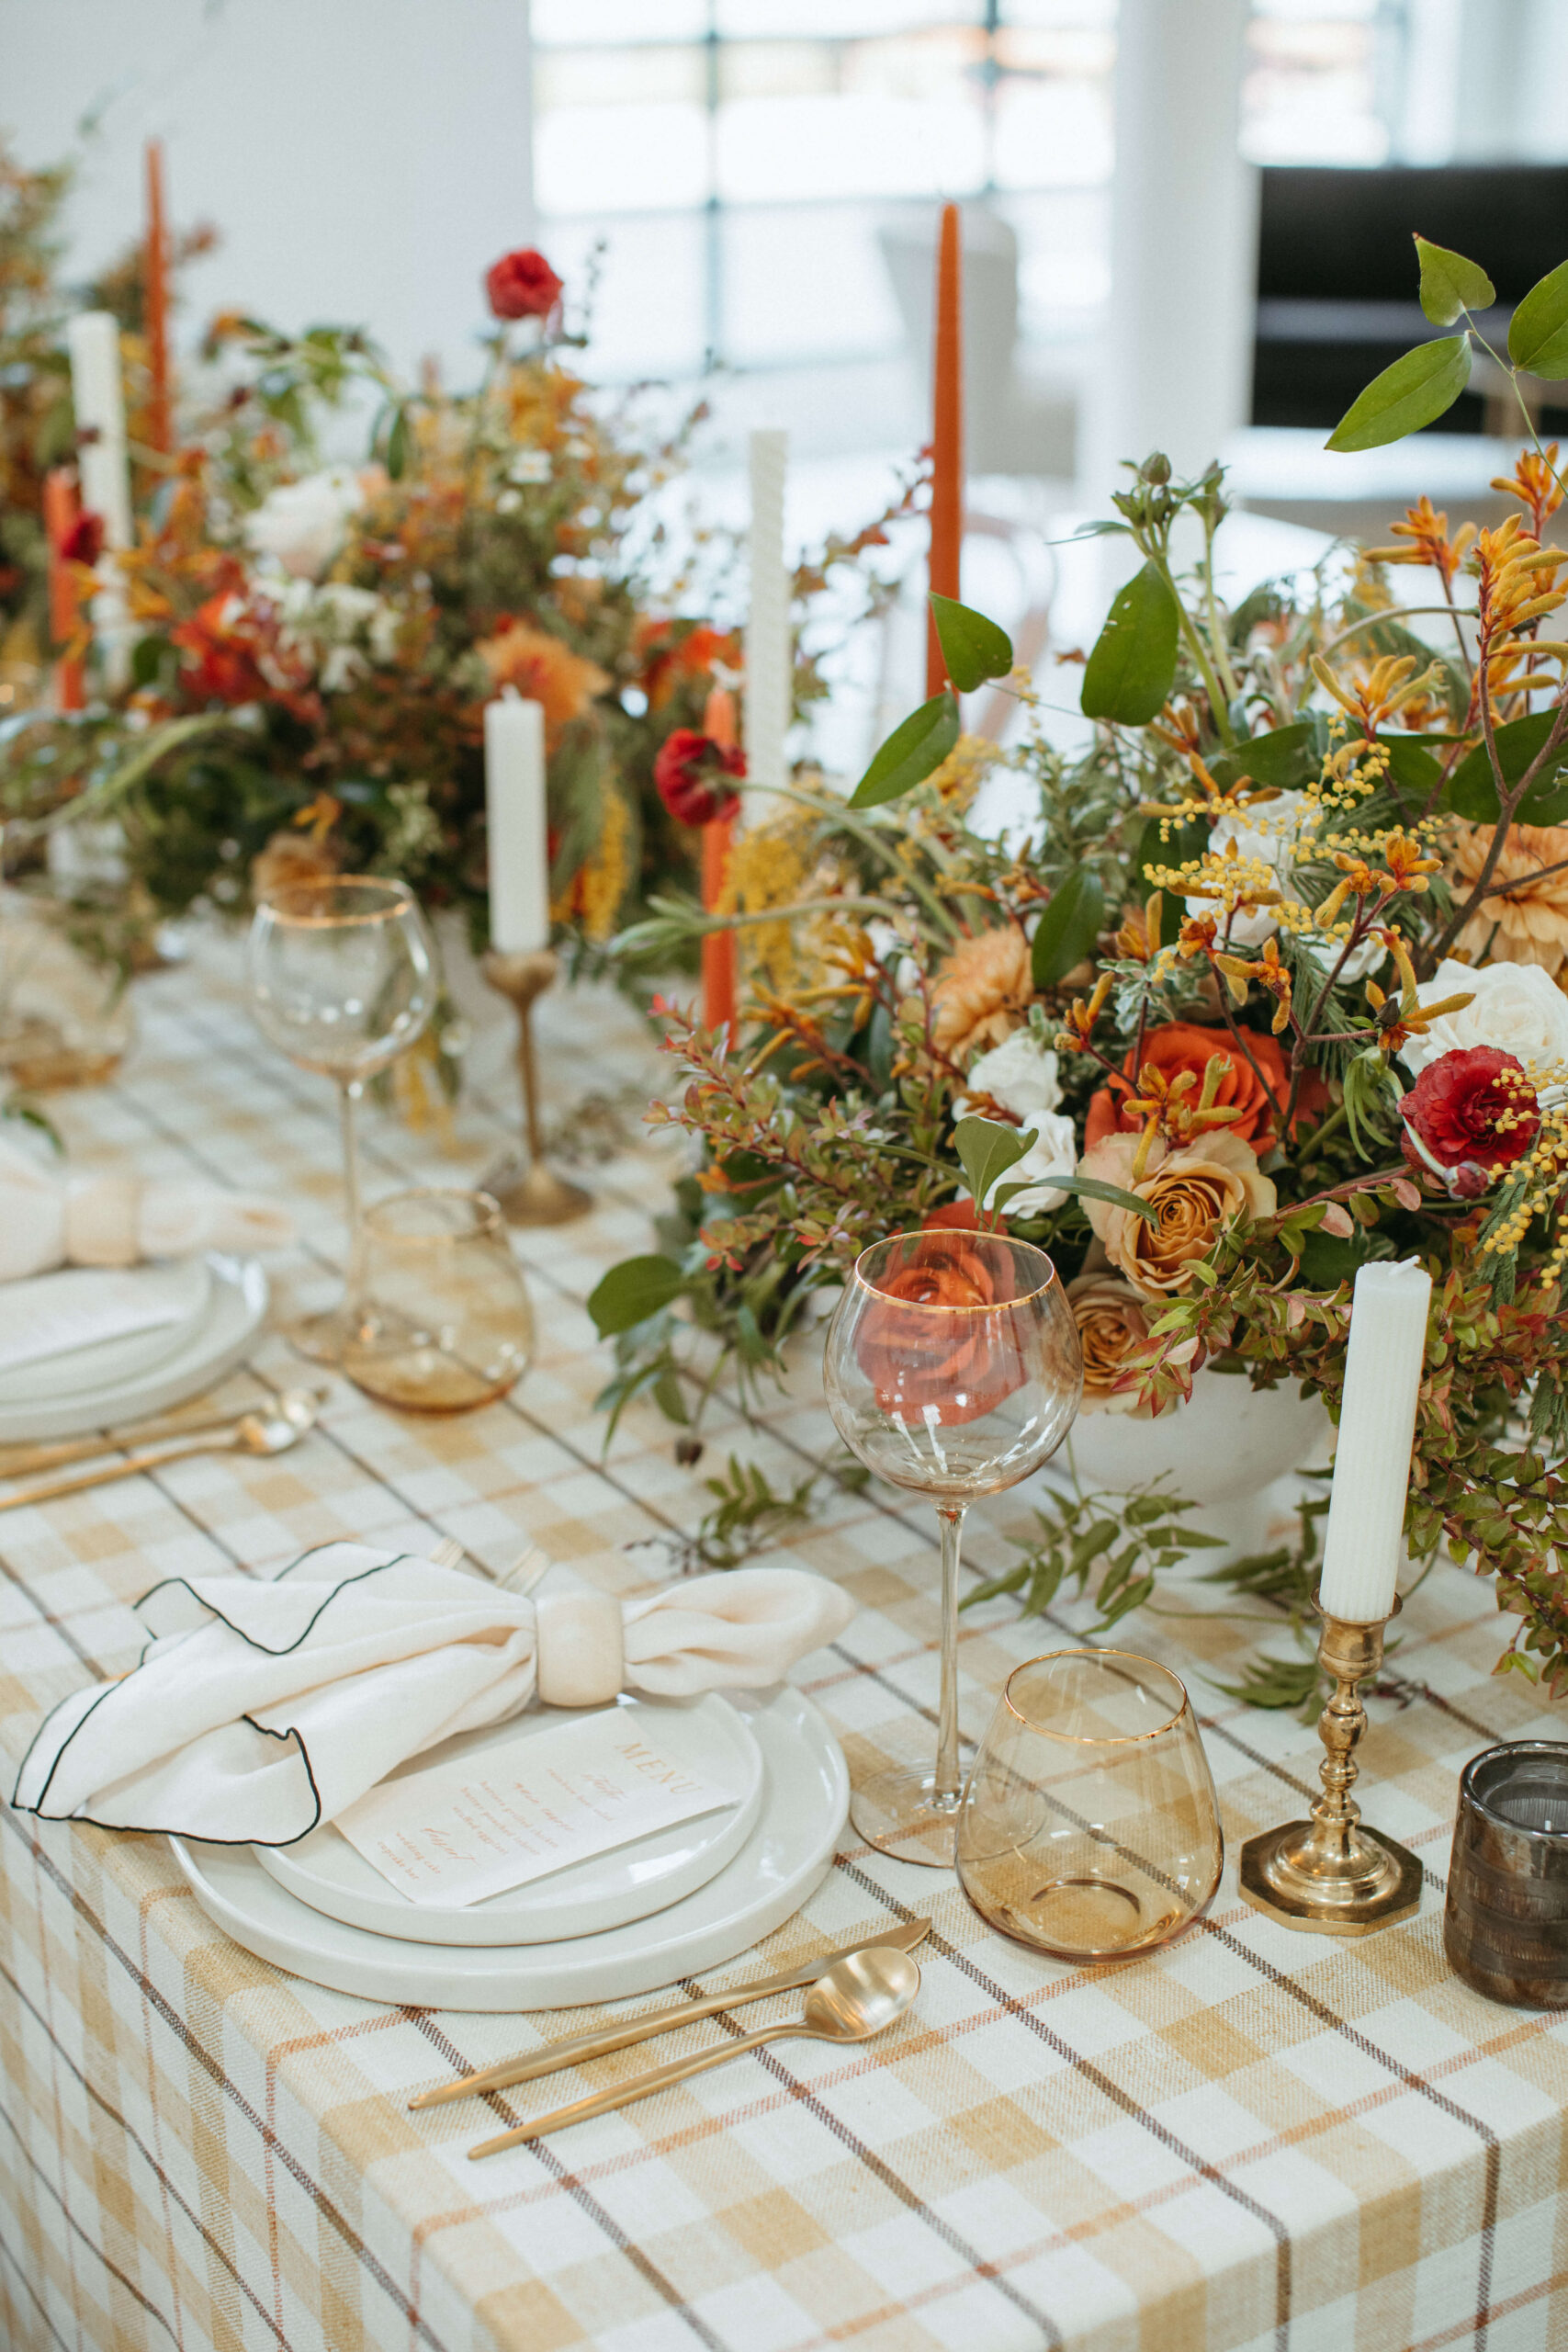 A rustic modern table setting with gold details and Sound River Studios